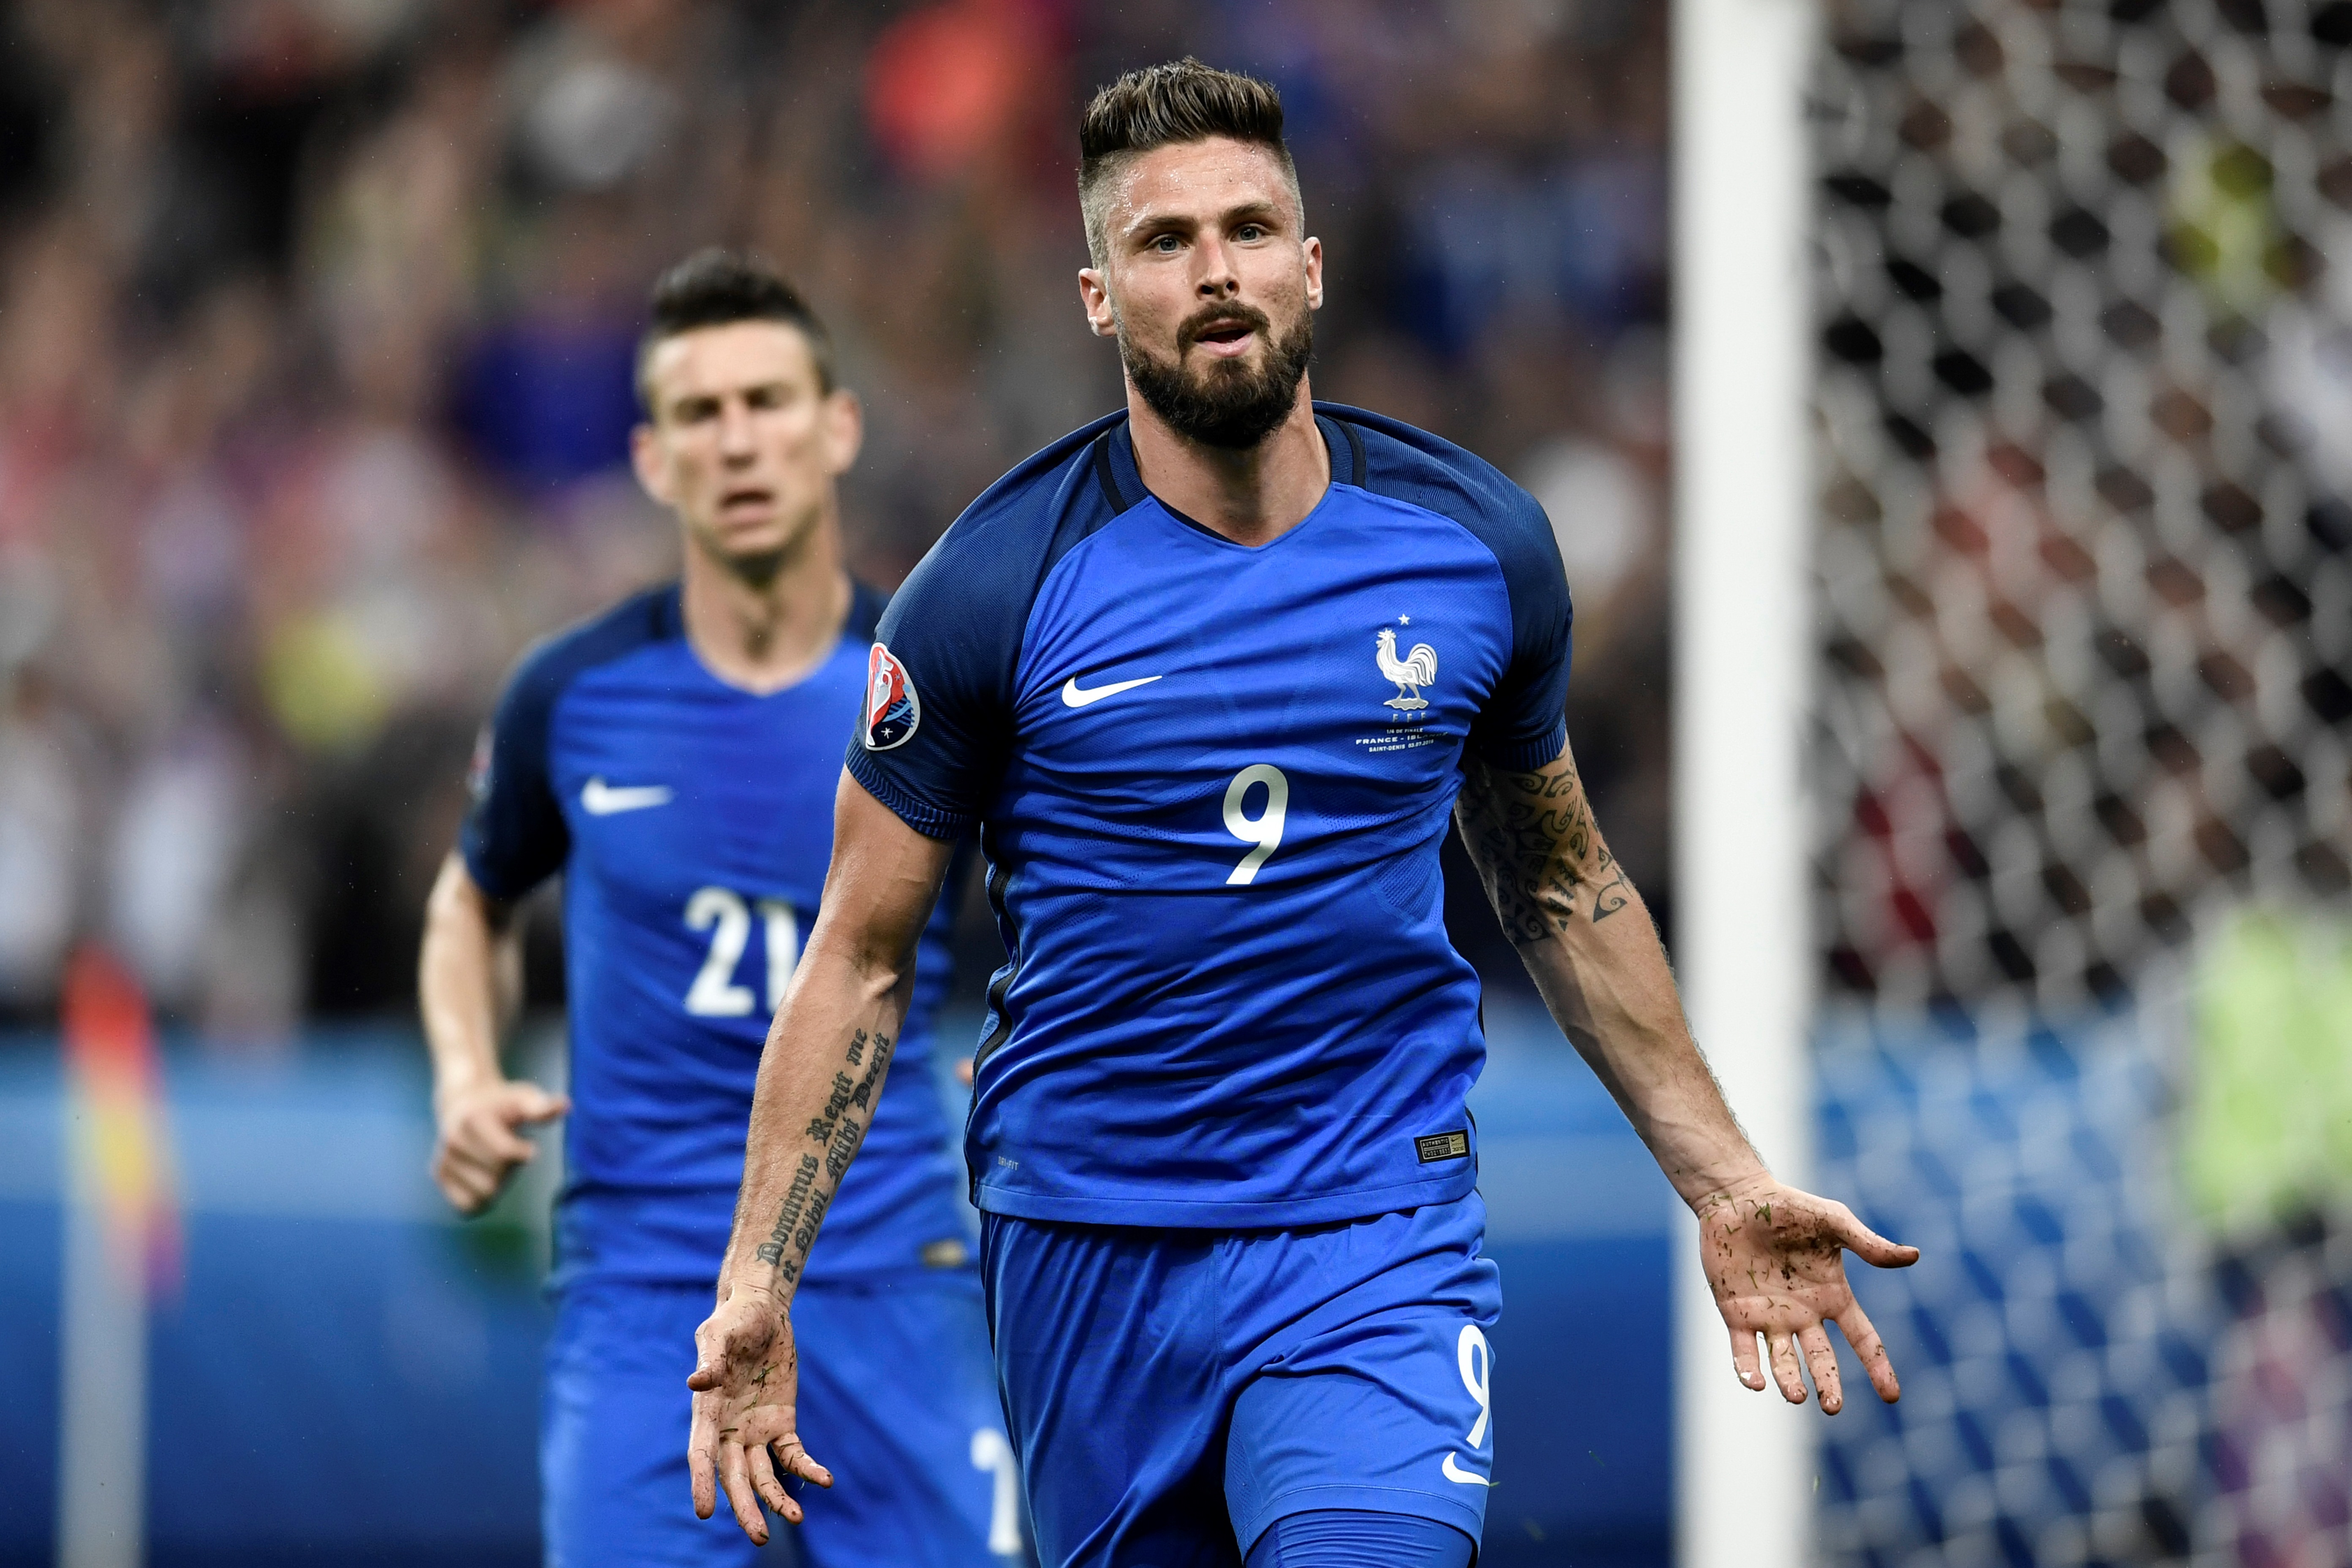 France's forward Olivier Giroud celebrates scoring a goal during the Euro 2016 quarter-final football match between France and Iceland at the Stade de France in Saint-Denis, near Paris, on July 3, 2016.  France won the match 5-2. / AFP PHOTO / PHILIPPE LOPEZ